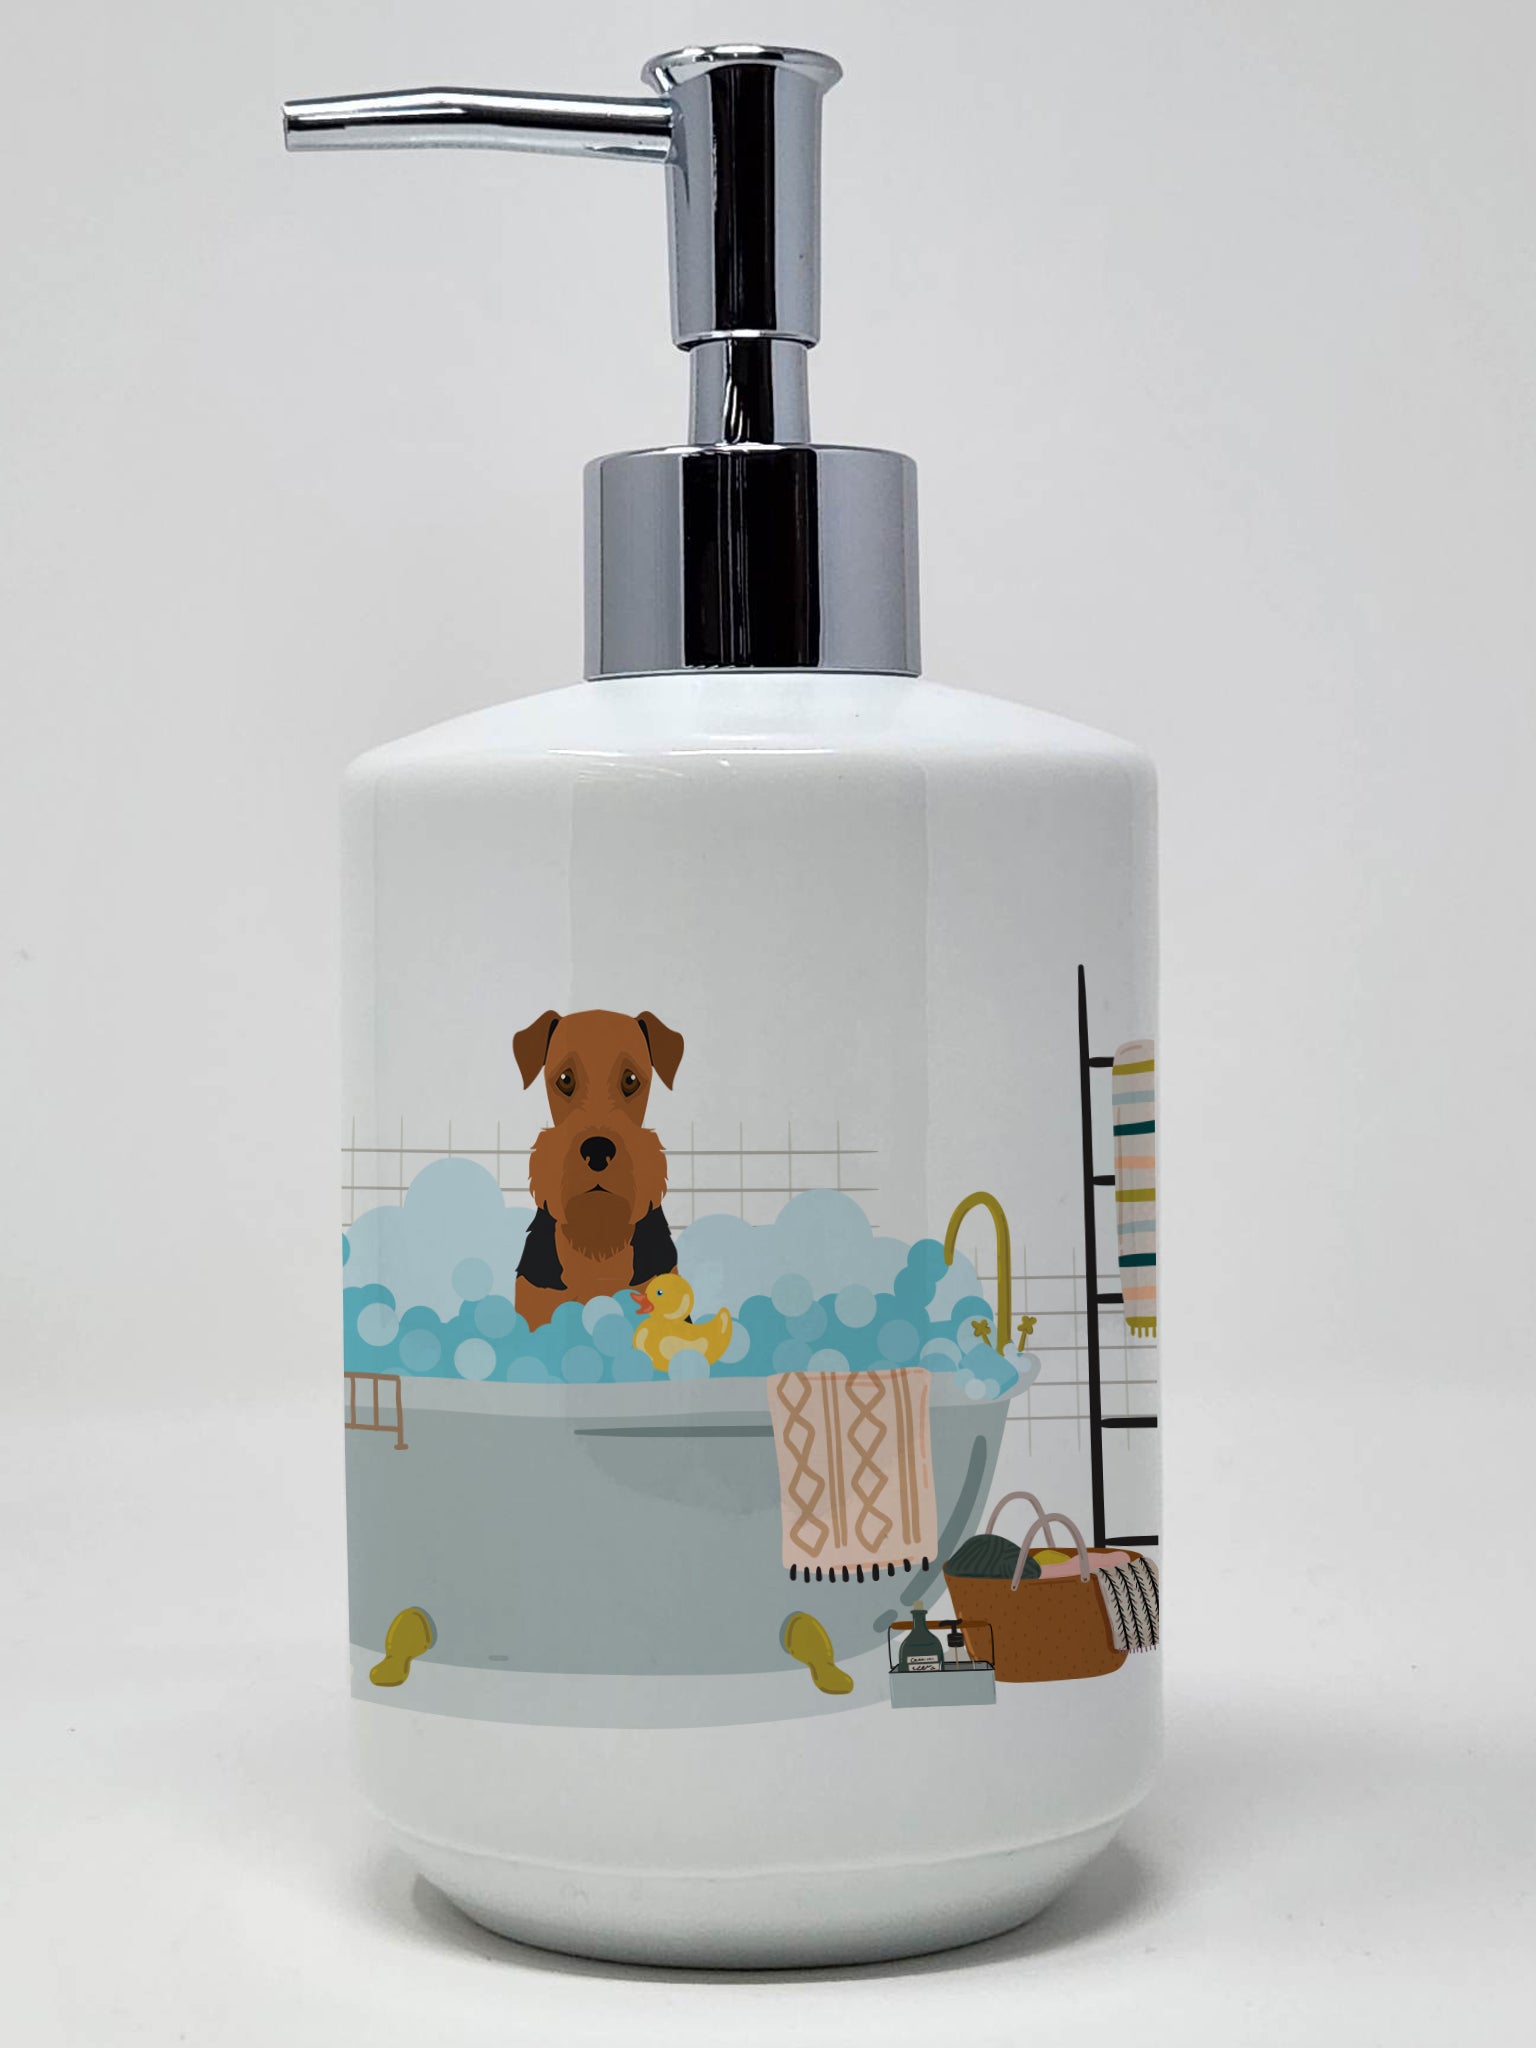 Buy this Black and Tan Airedale Terrier Ceramic Soap Dispenser